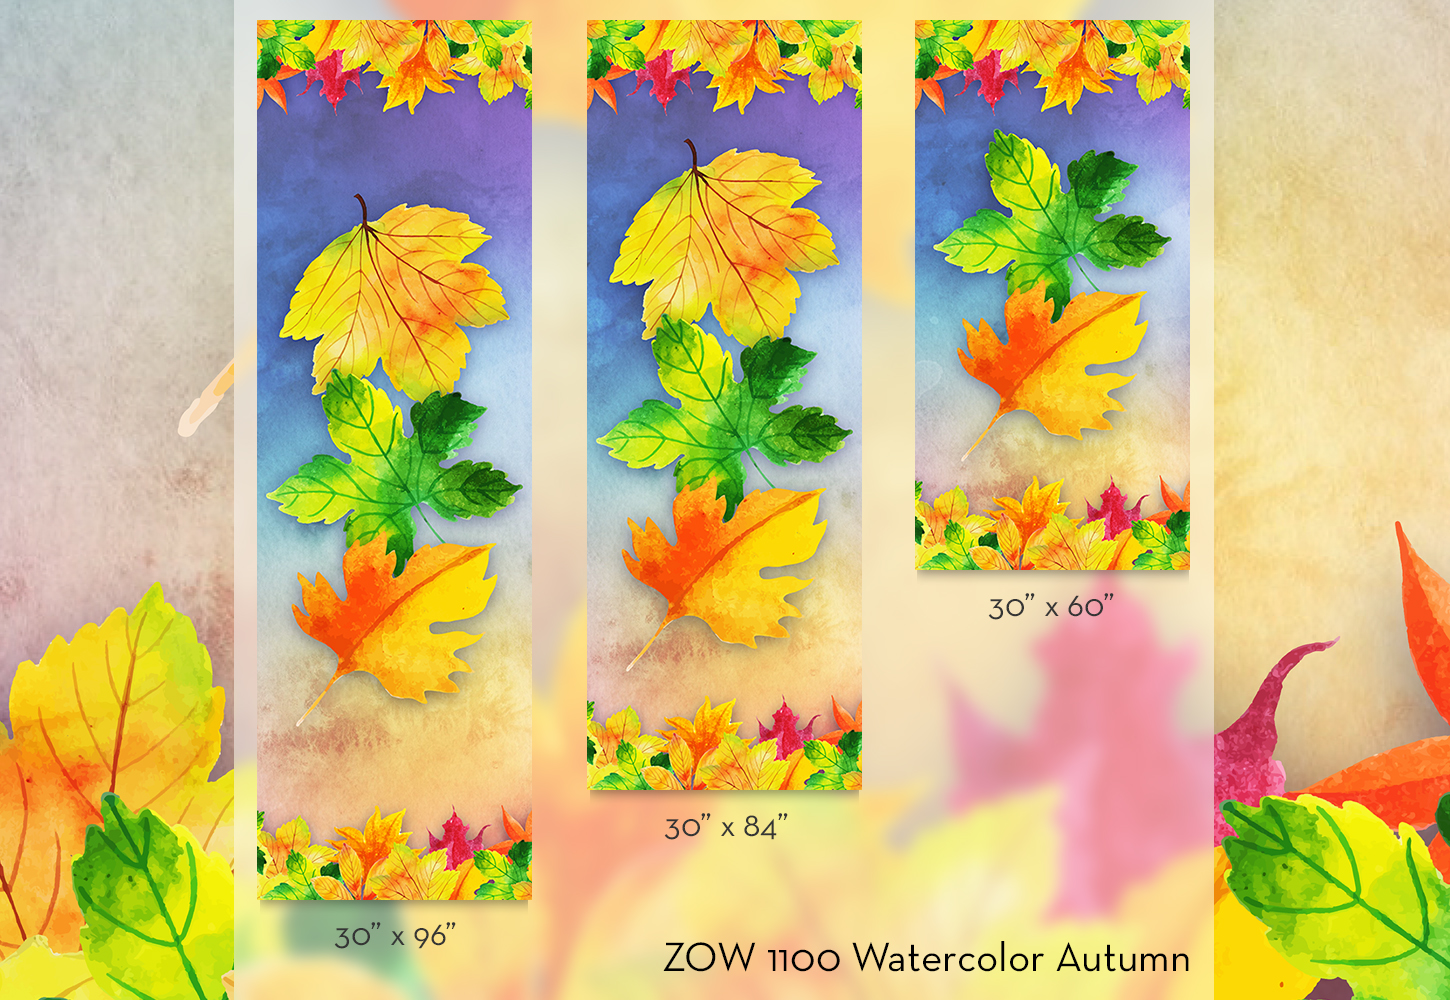 ZOW 1100 Watercolor Autumn